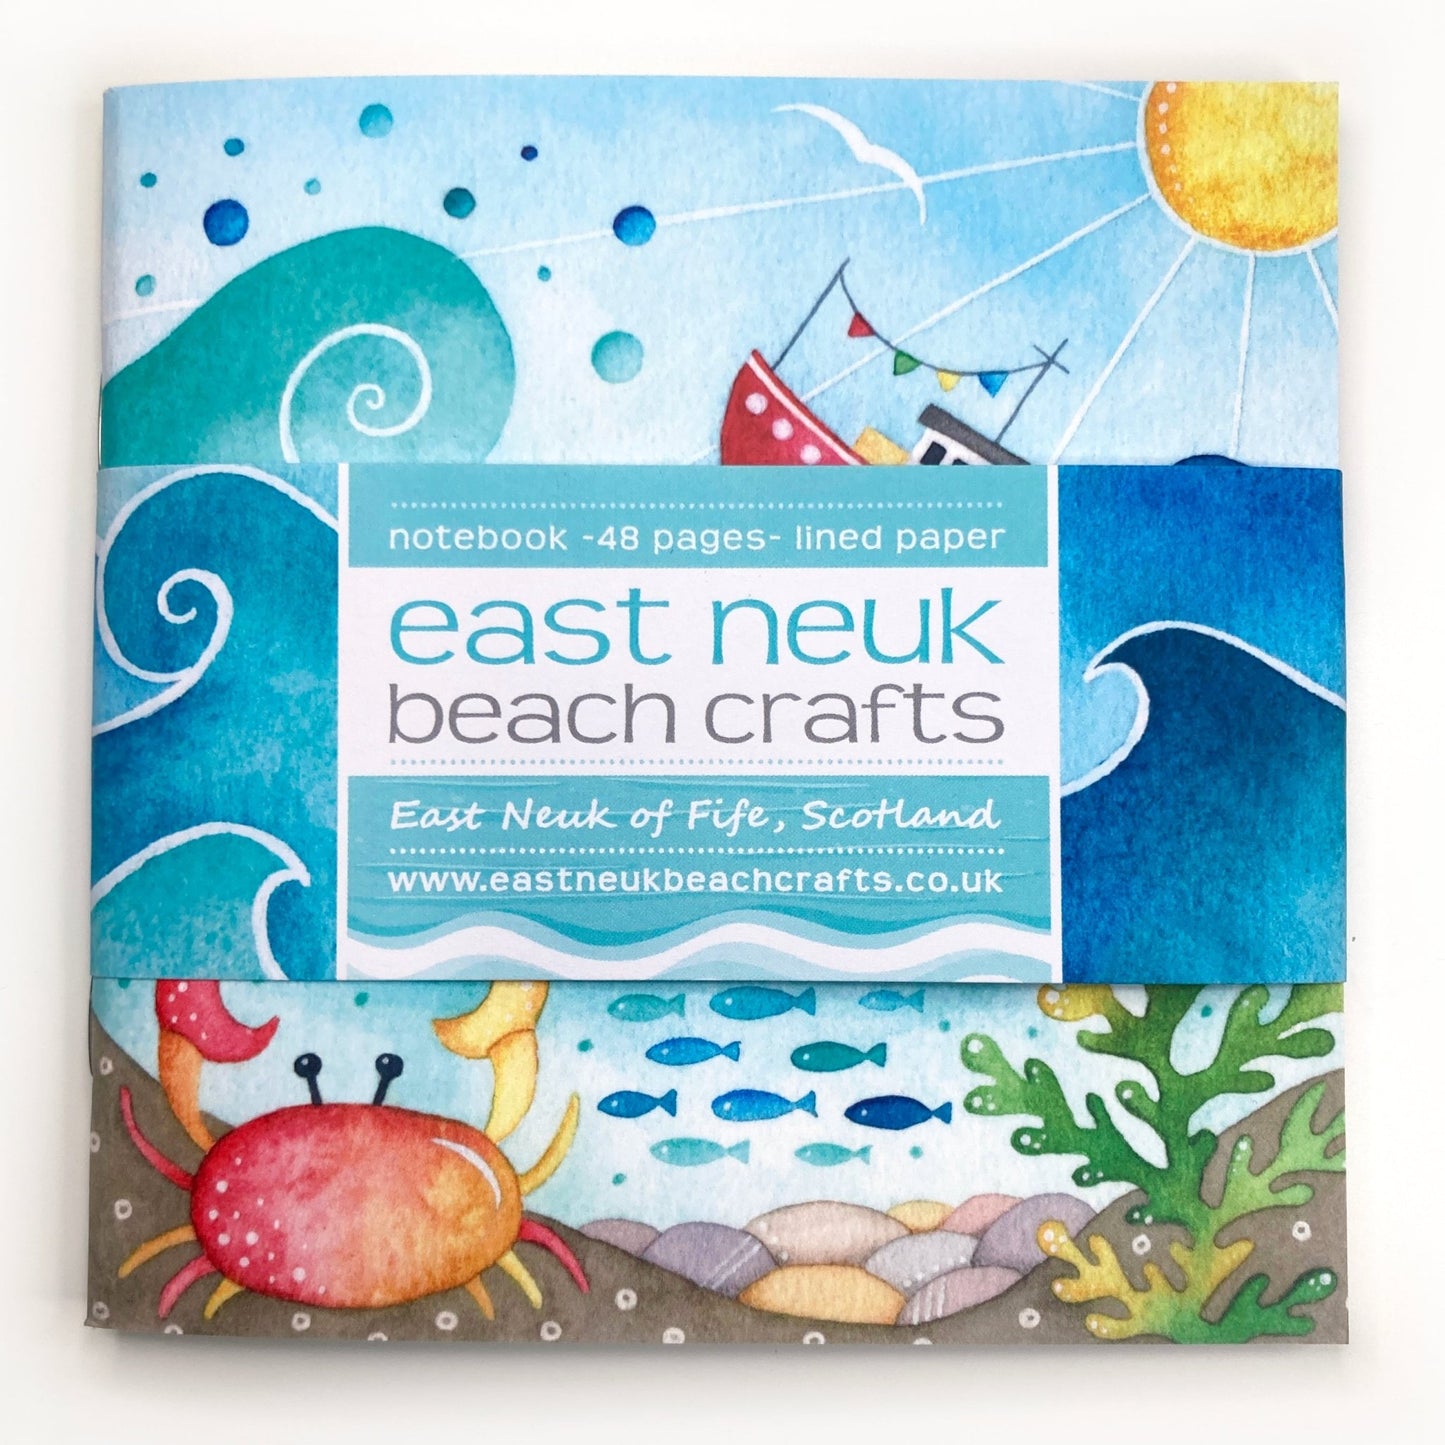 Square Lined Notebook - Crab & Fishing Boat - Seaside Art Journal - East Neuk Beach Crafts